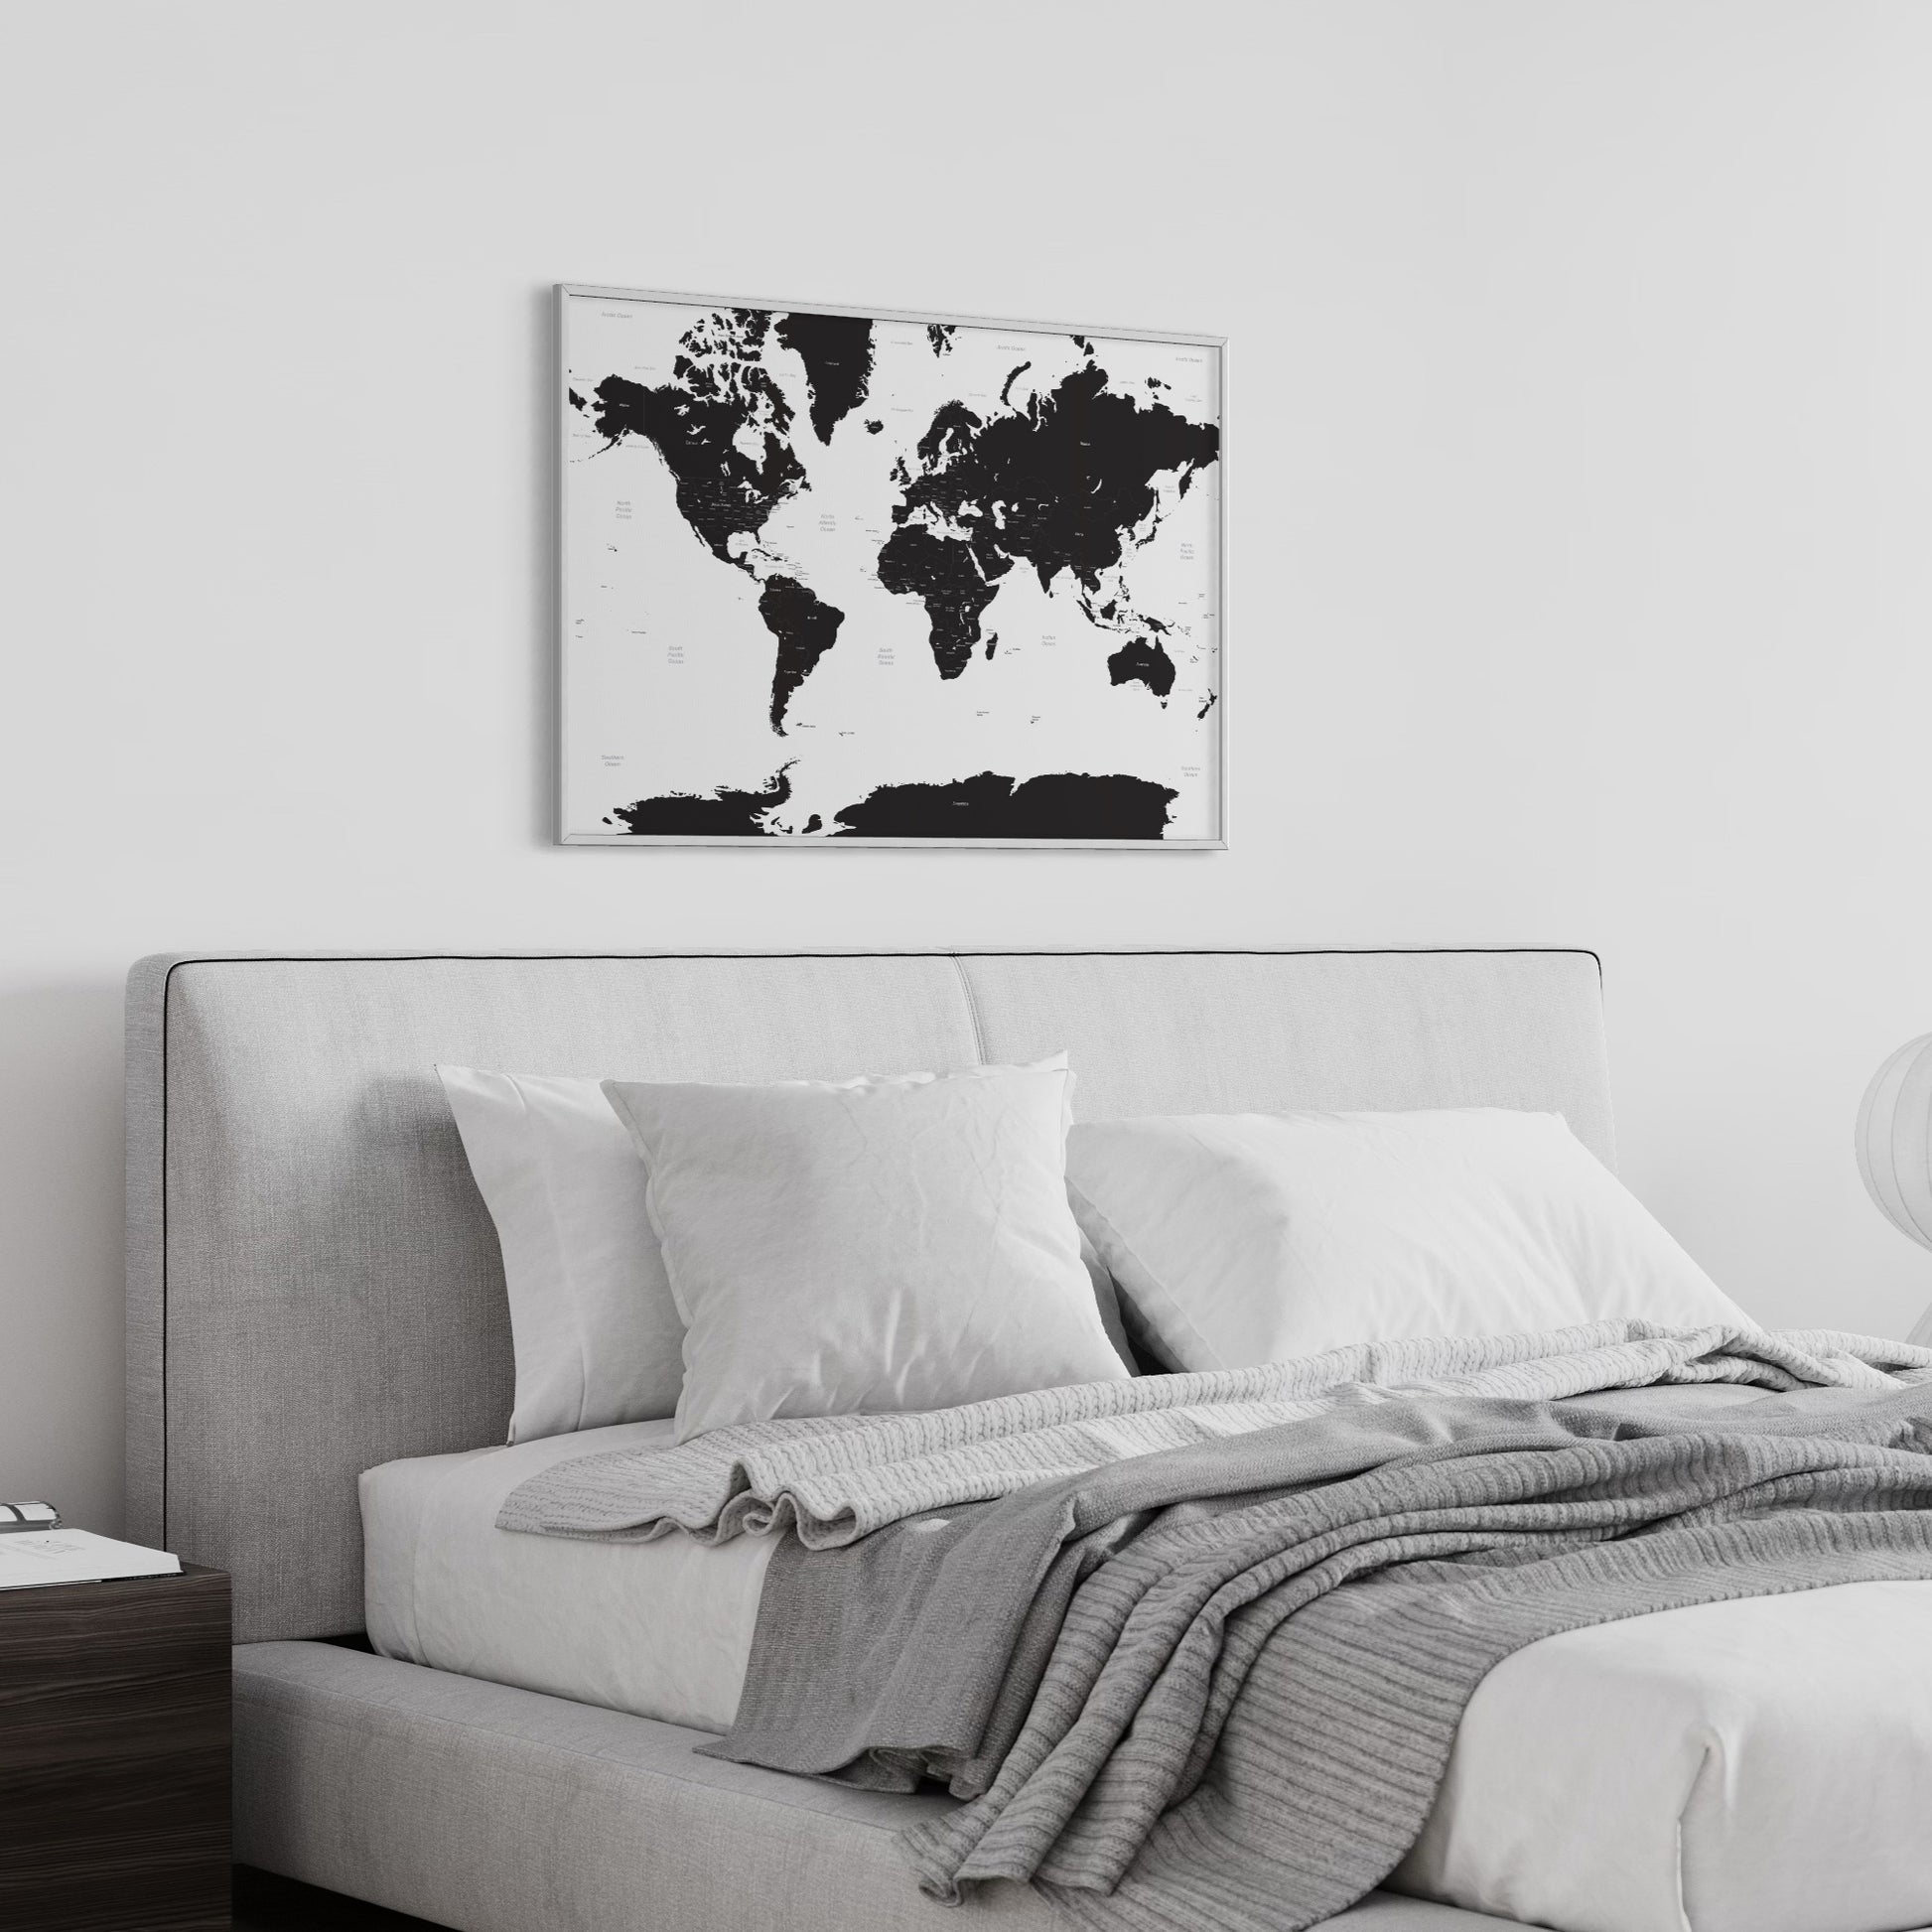 White Sea Black Countries Map of the World on Wall Above Grey Bed